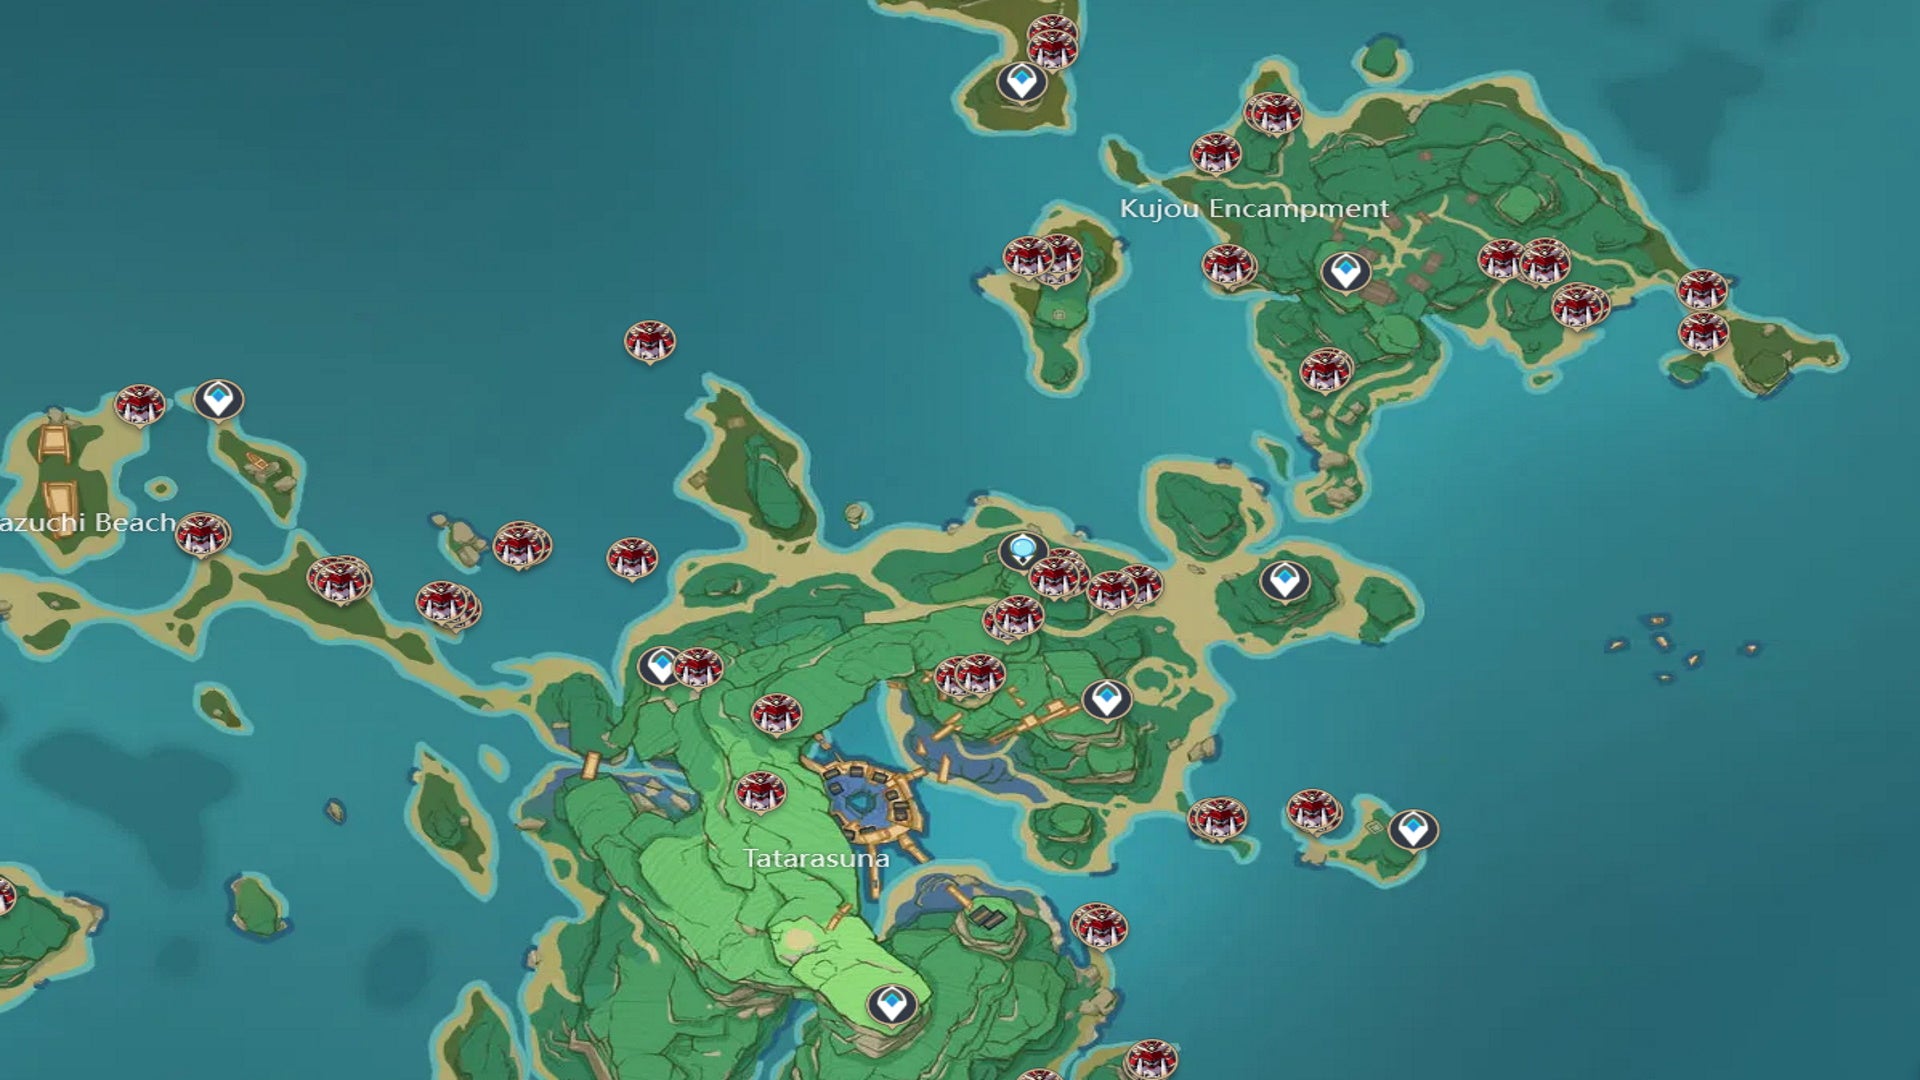 Genshin Handguard locations: A map shows the entirety of Tatarasuna Island, with red icons indicating where to find Nobushi, mainly north of the forge and around Kujou Encampment